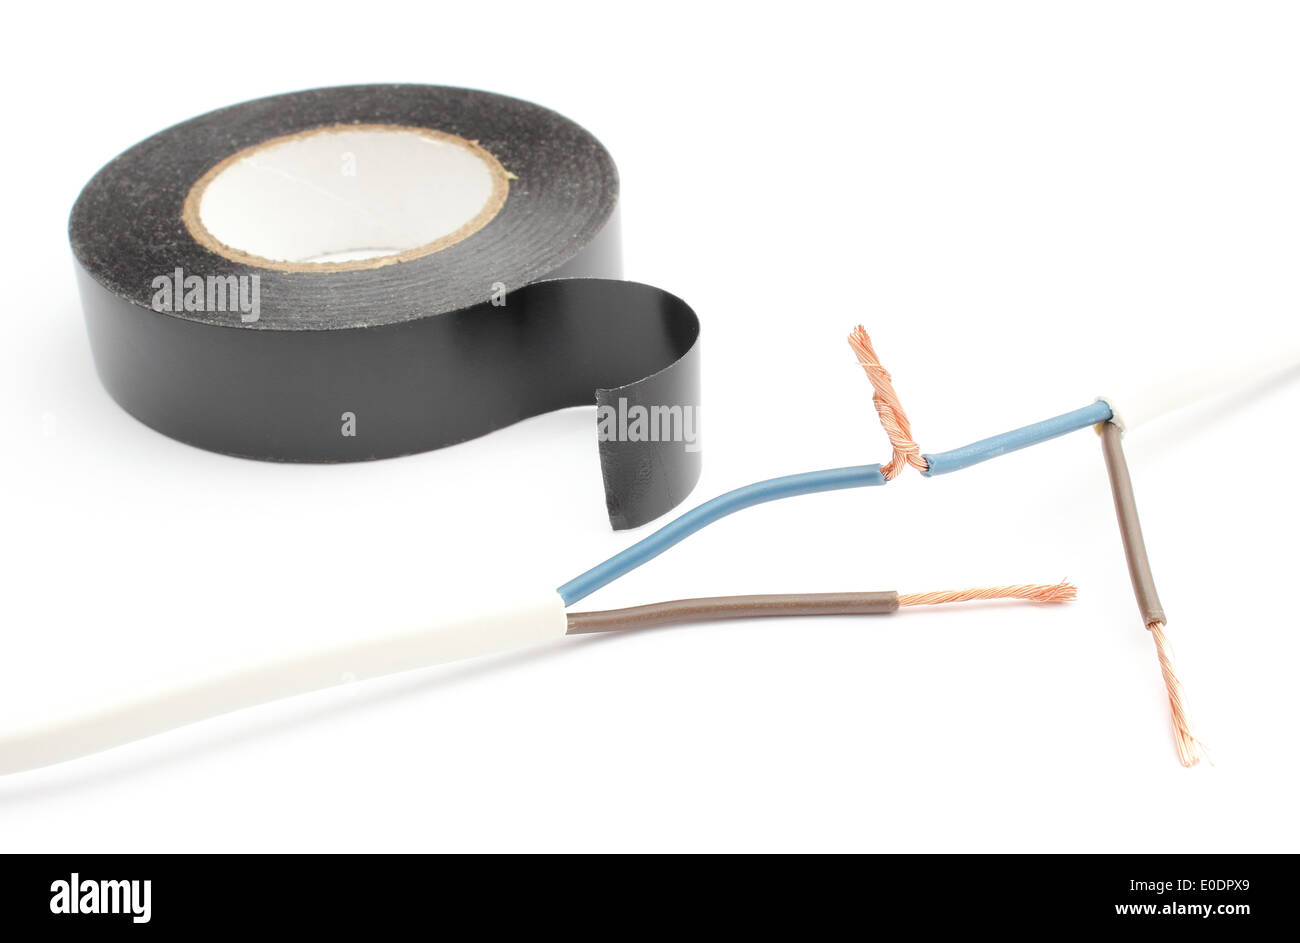 Closeup of connecting electrical cable, repair of electrical cable using insulating tape, tangled electrical cable Stock Photo